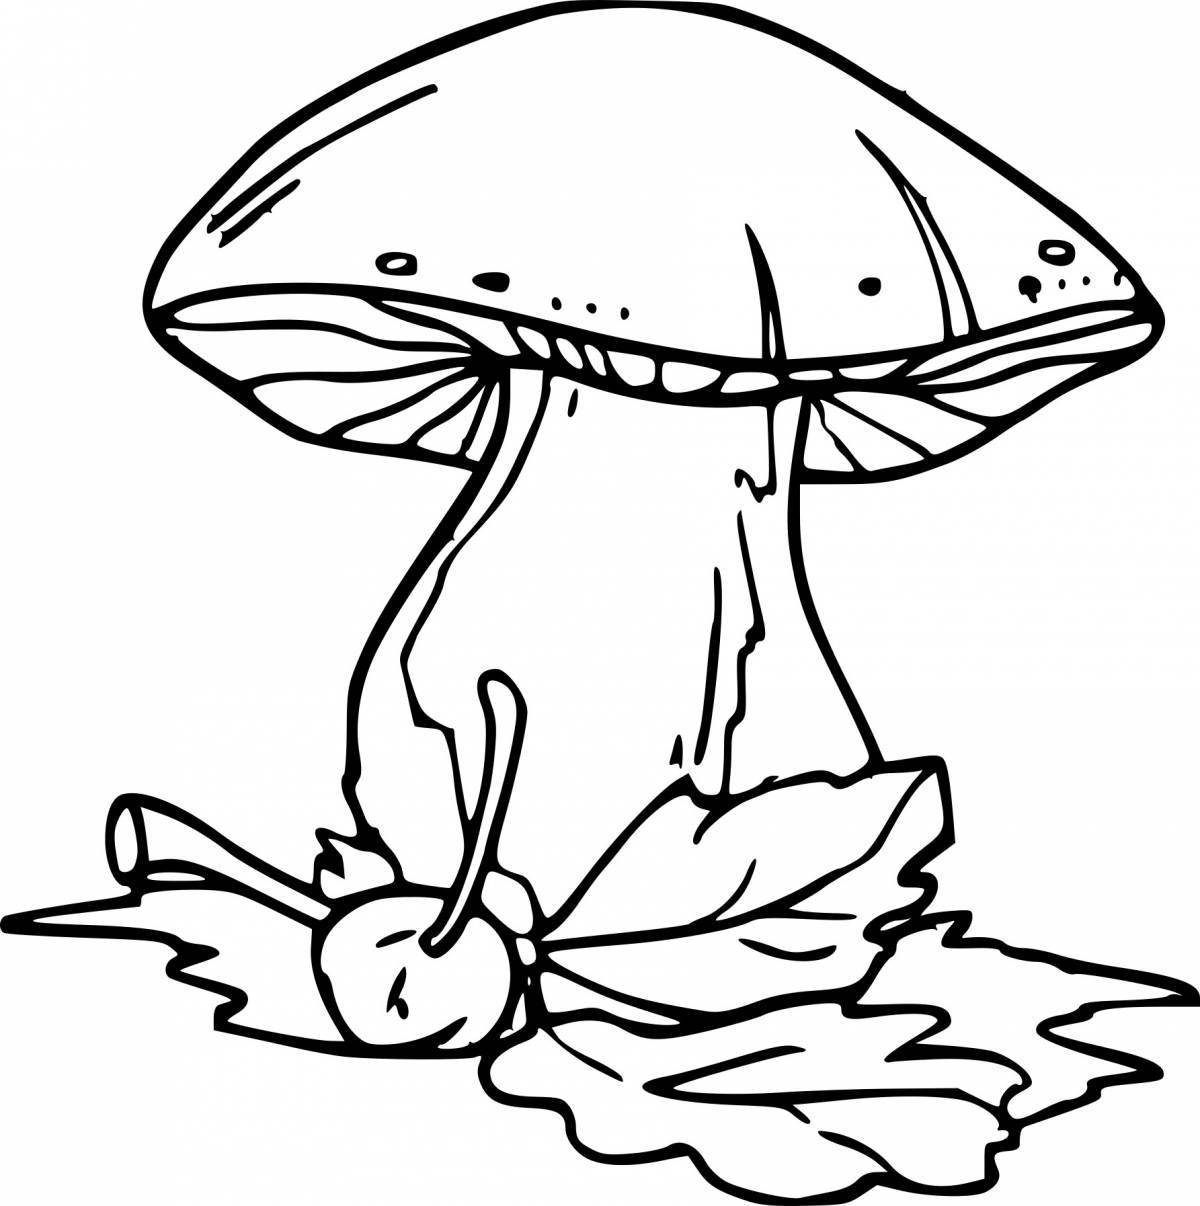 Fun coloring book with mushrooms for 3-4 year olds